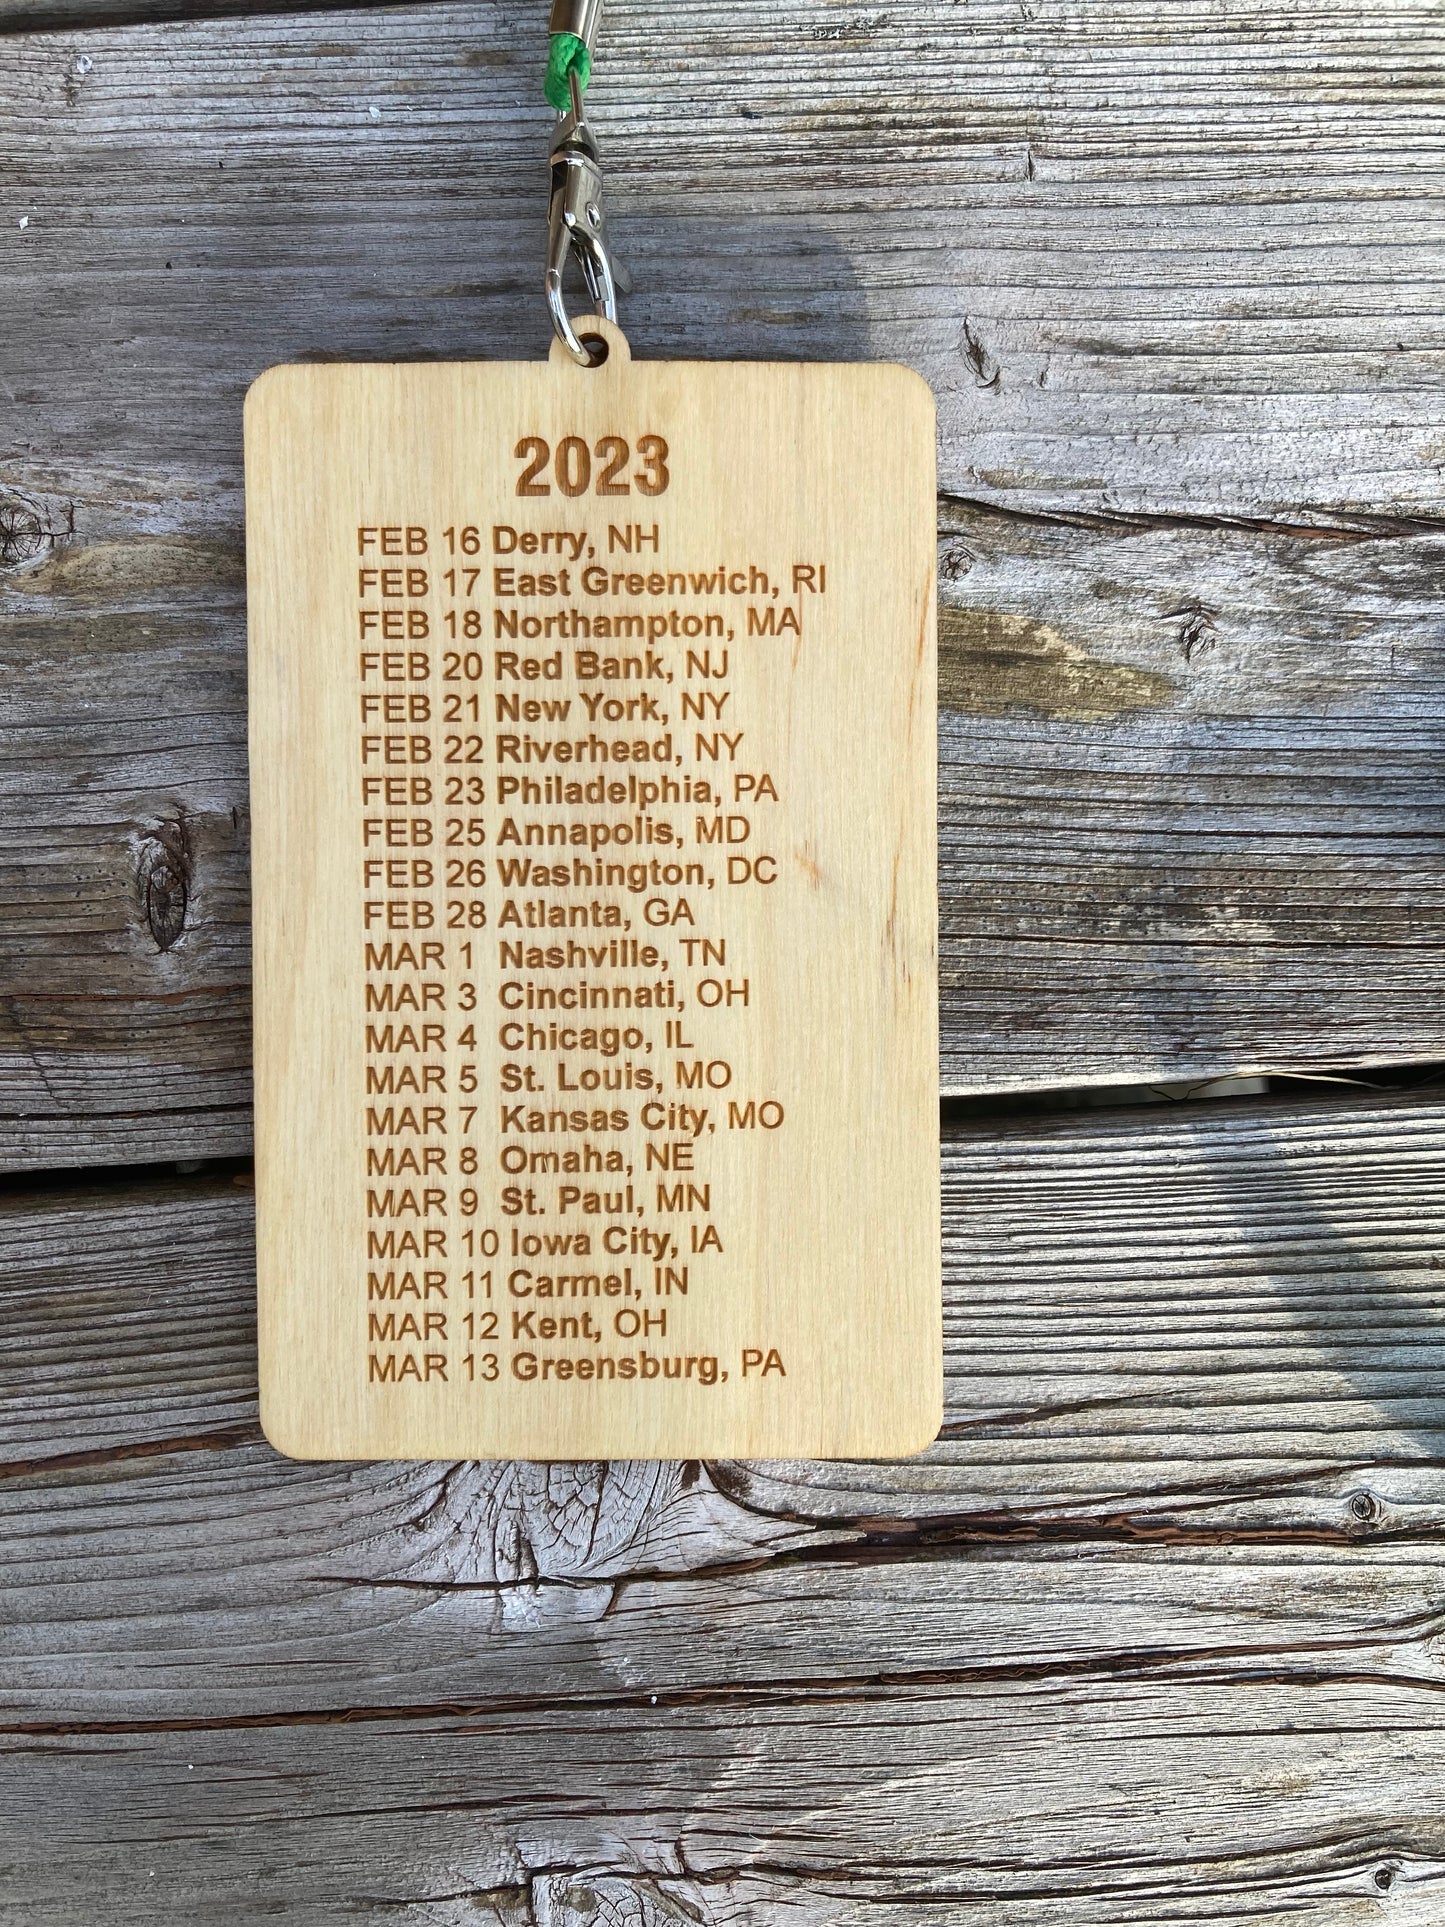 2023 Numbered Limited Edition Wooden Tour Credential with Tour Dates on Back